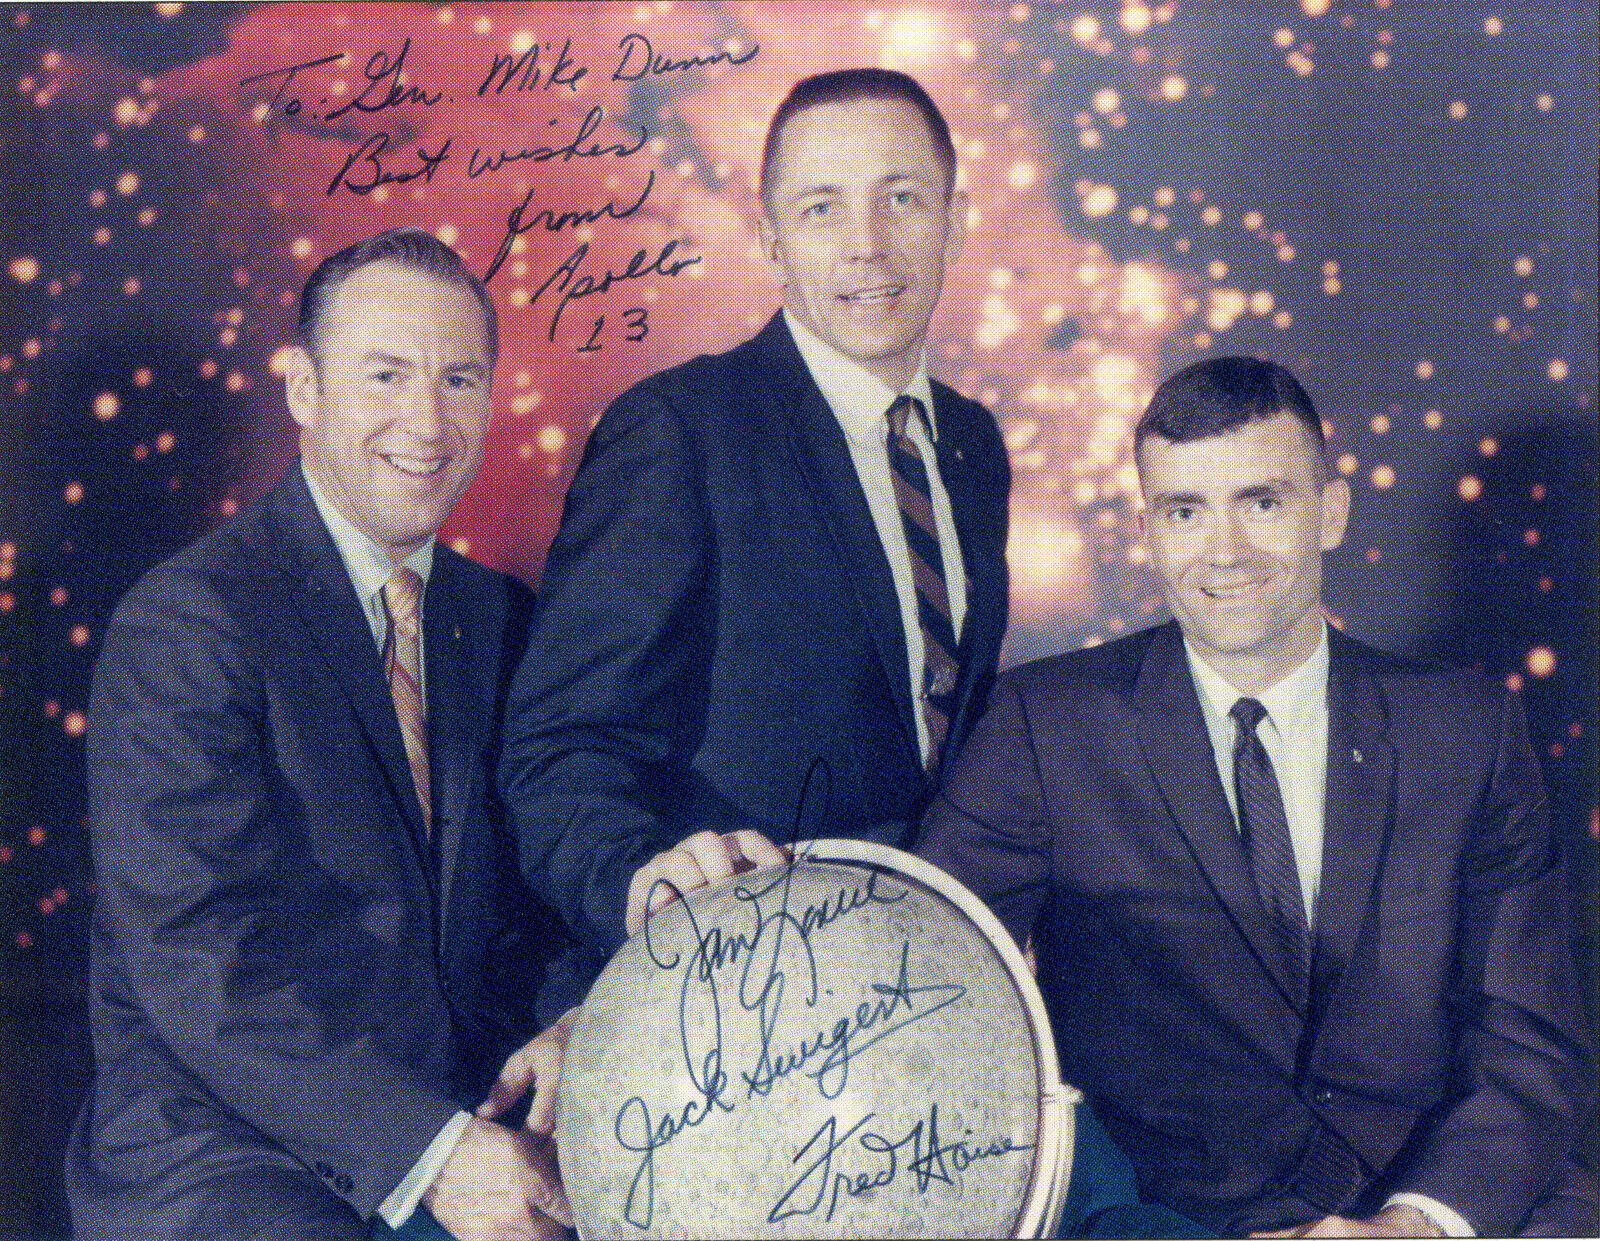 JAMES JIM LOVELL Jack Swigert FRED HAISE Signed Photo Poster paintinggraph Apollo 13 preprint